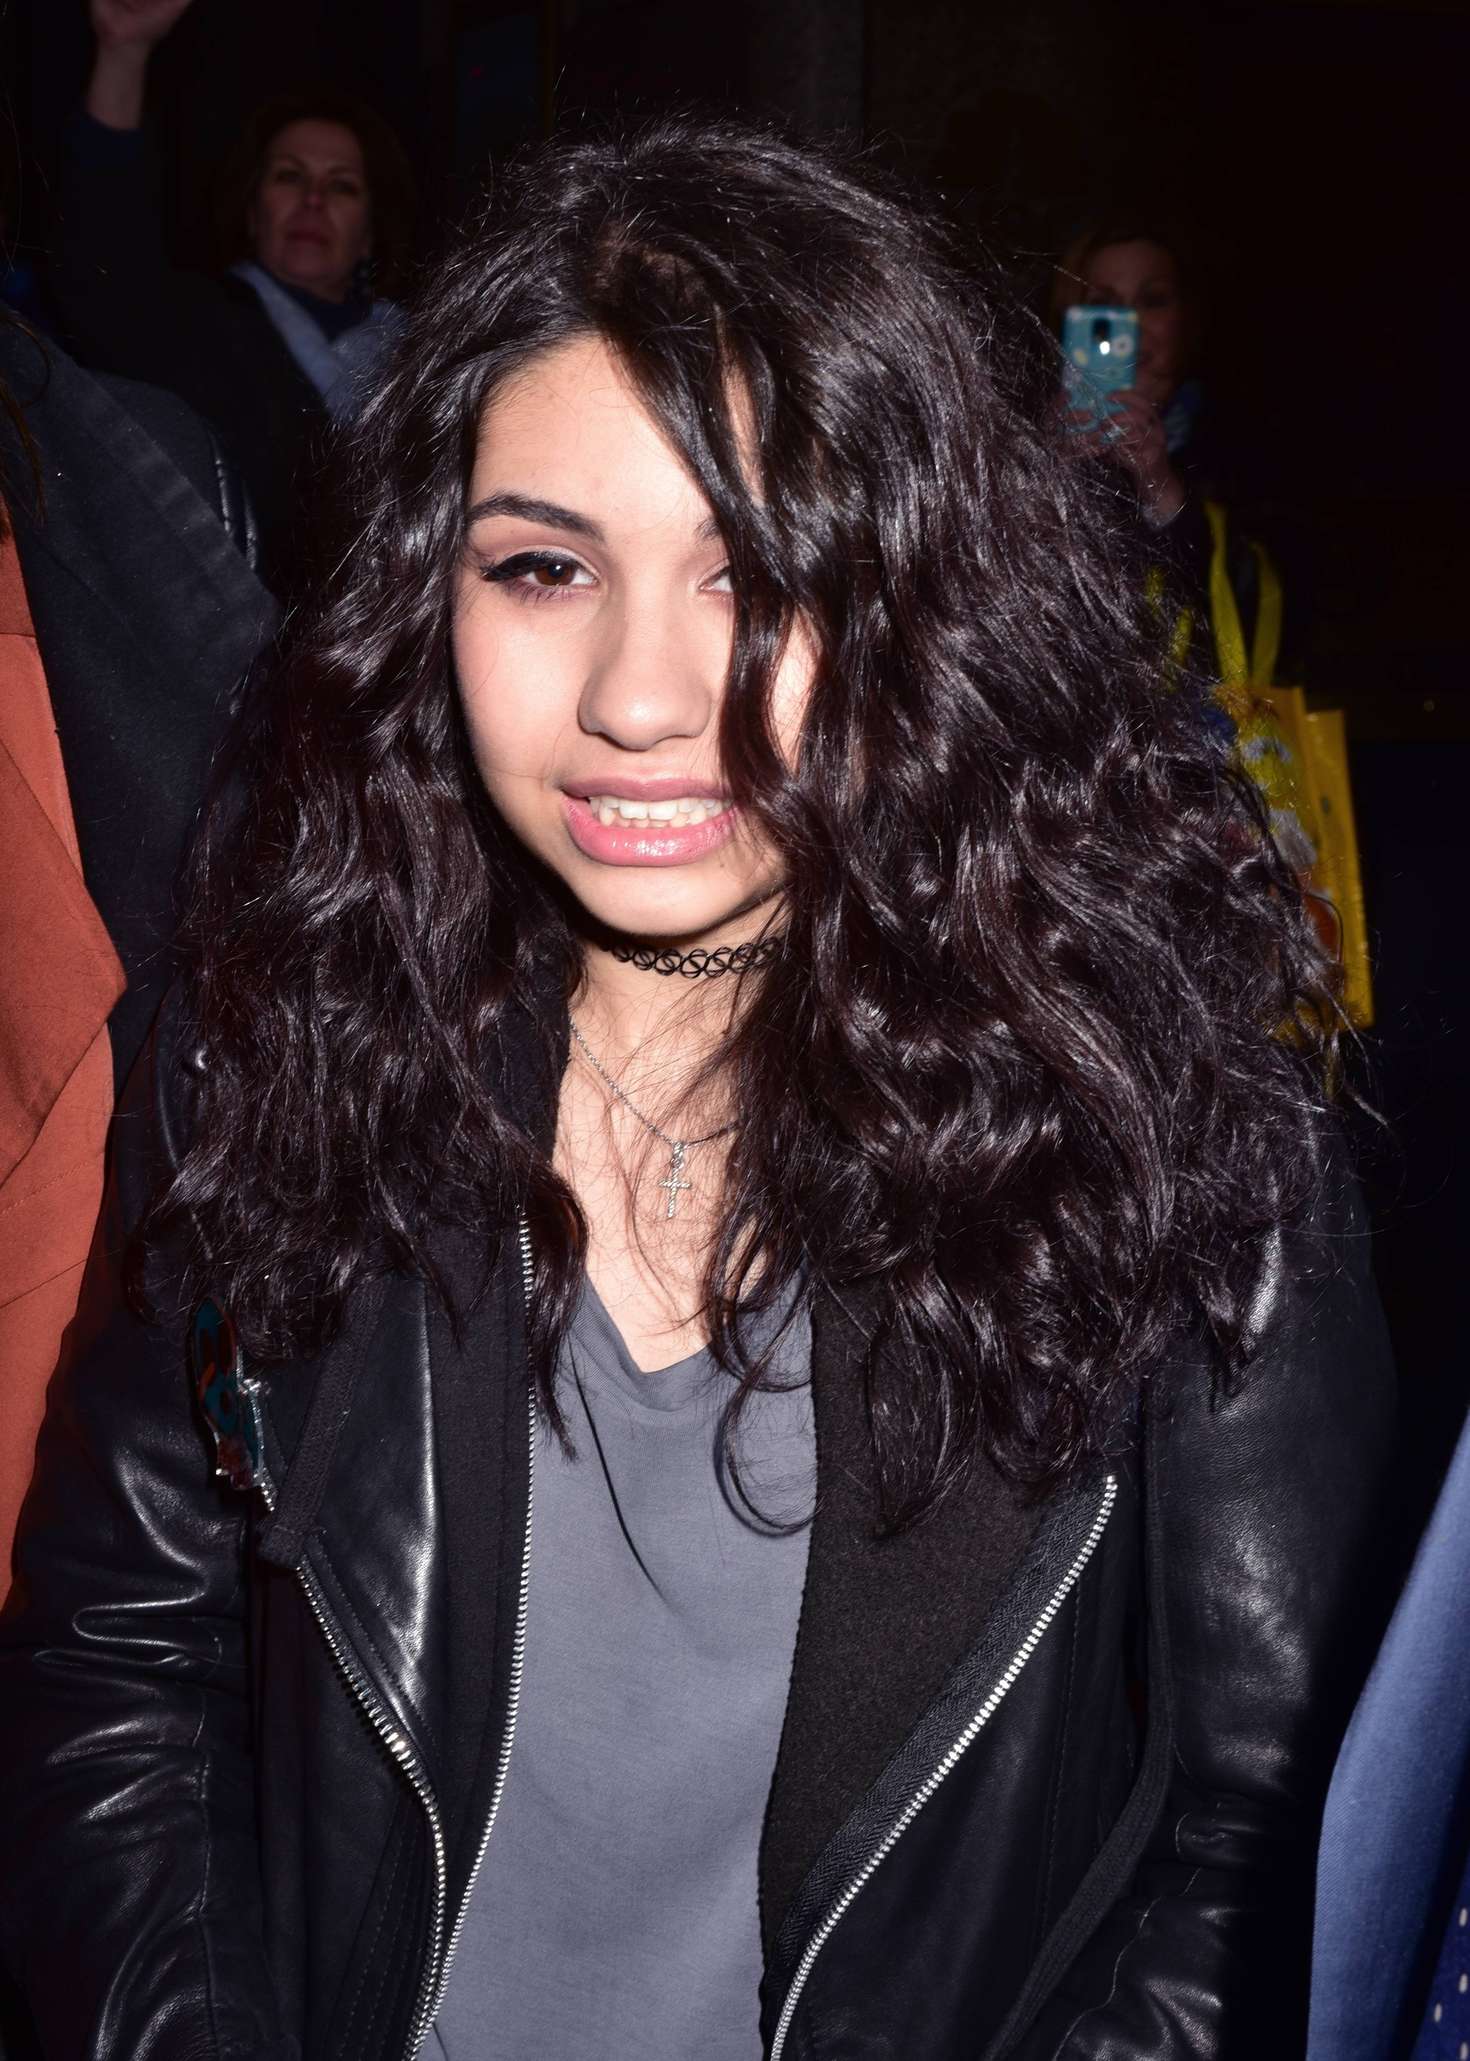 Alessia Cara â€“ Leaving â€˜The Tonight Show Starring Jimmy Fallonâ€™ in NYC